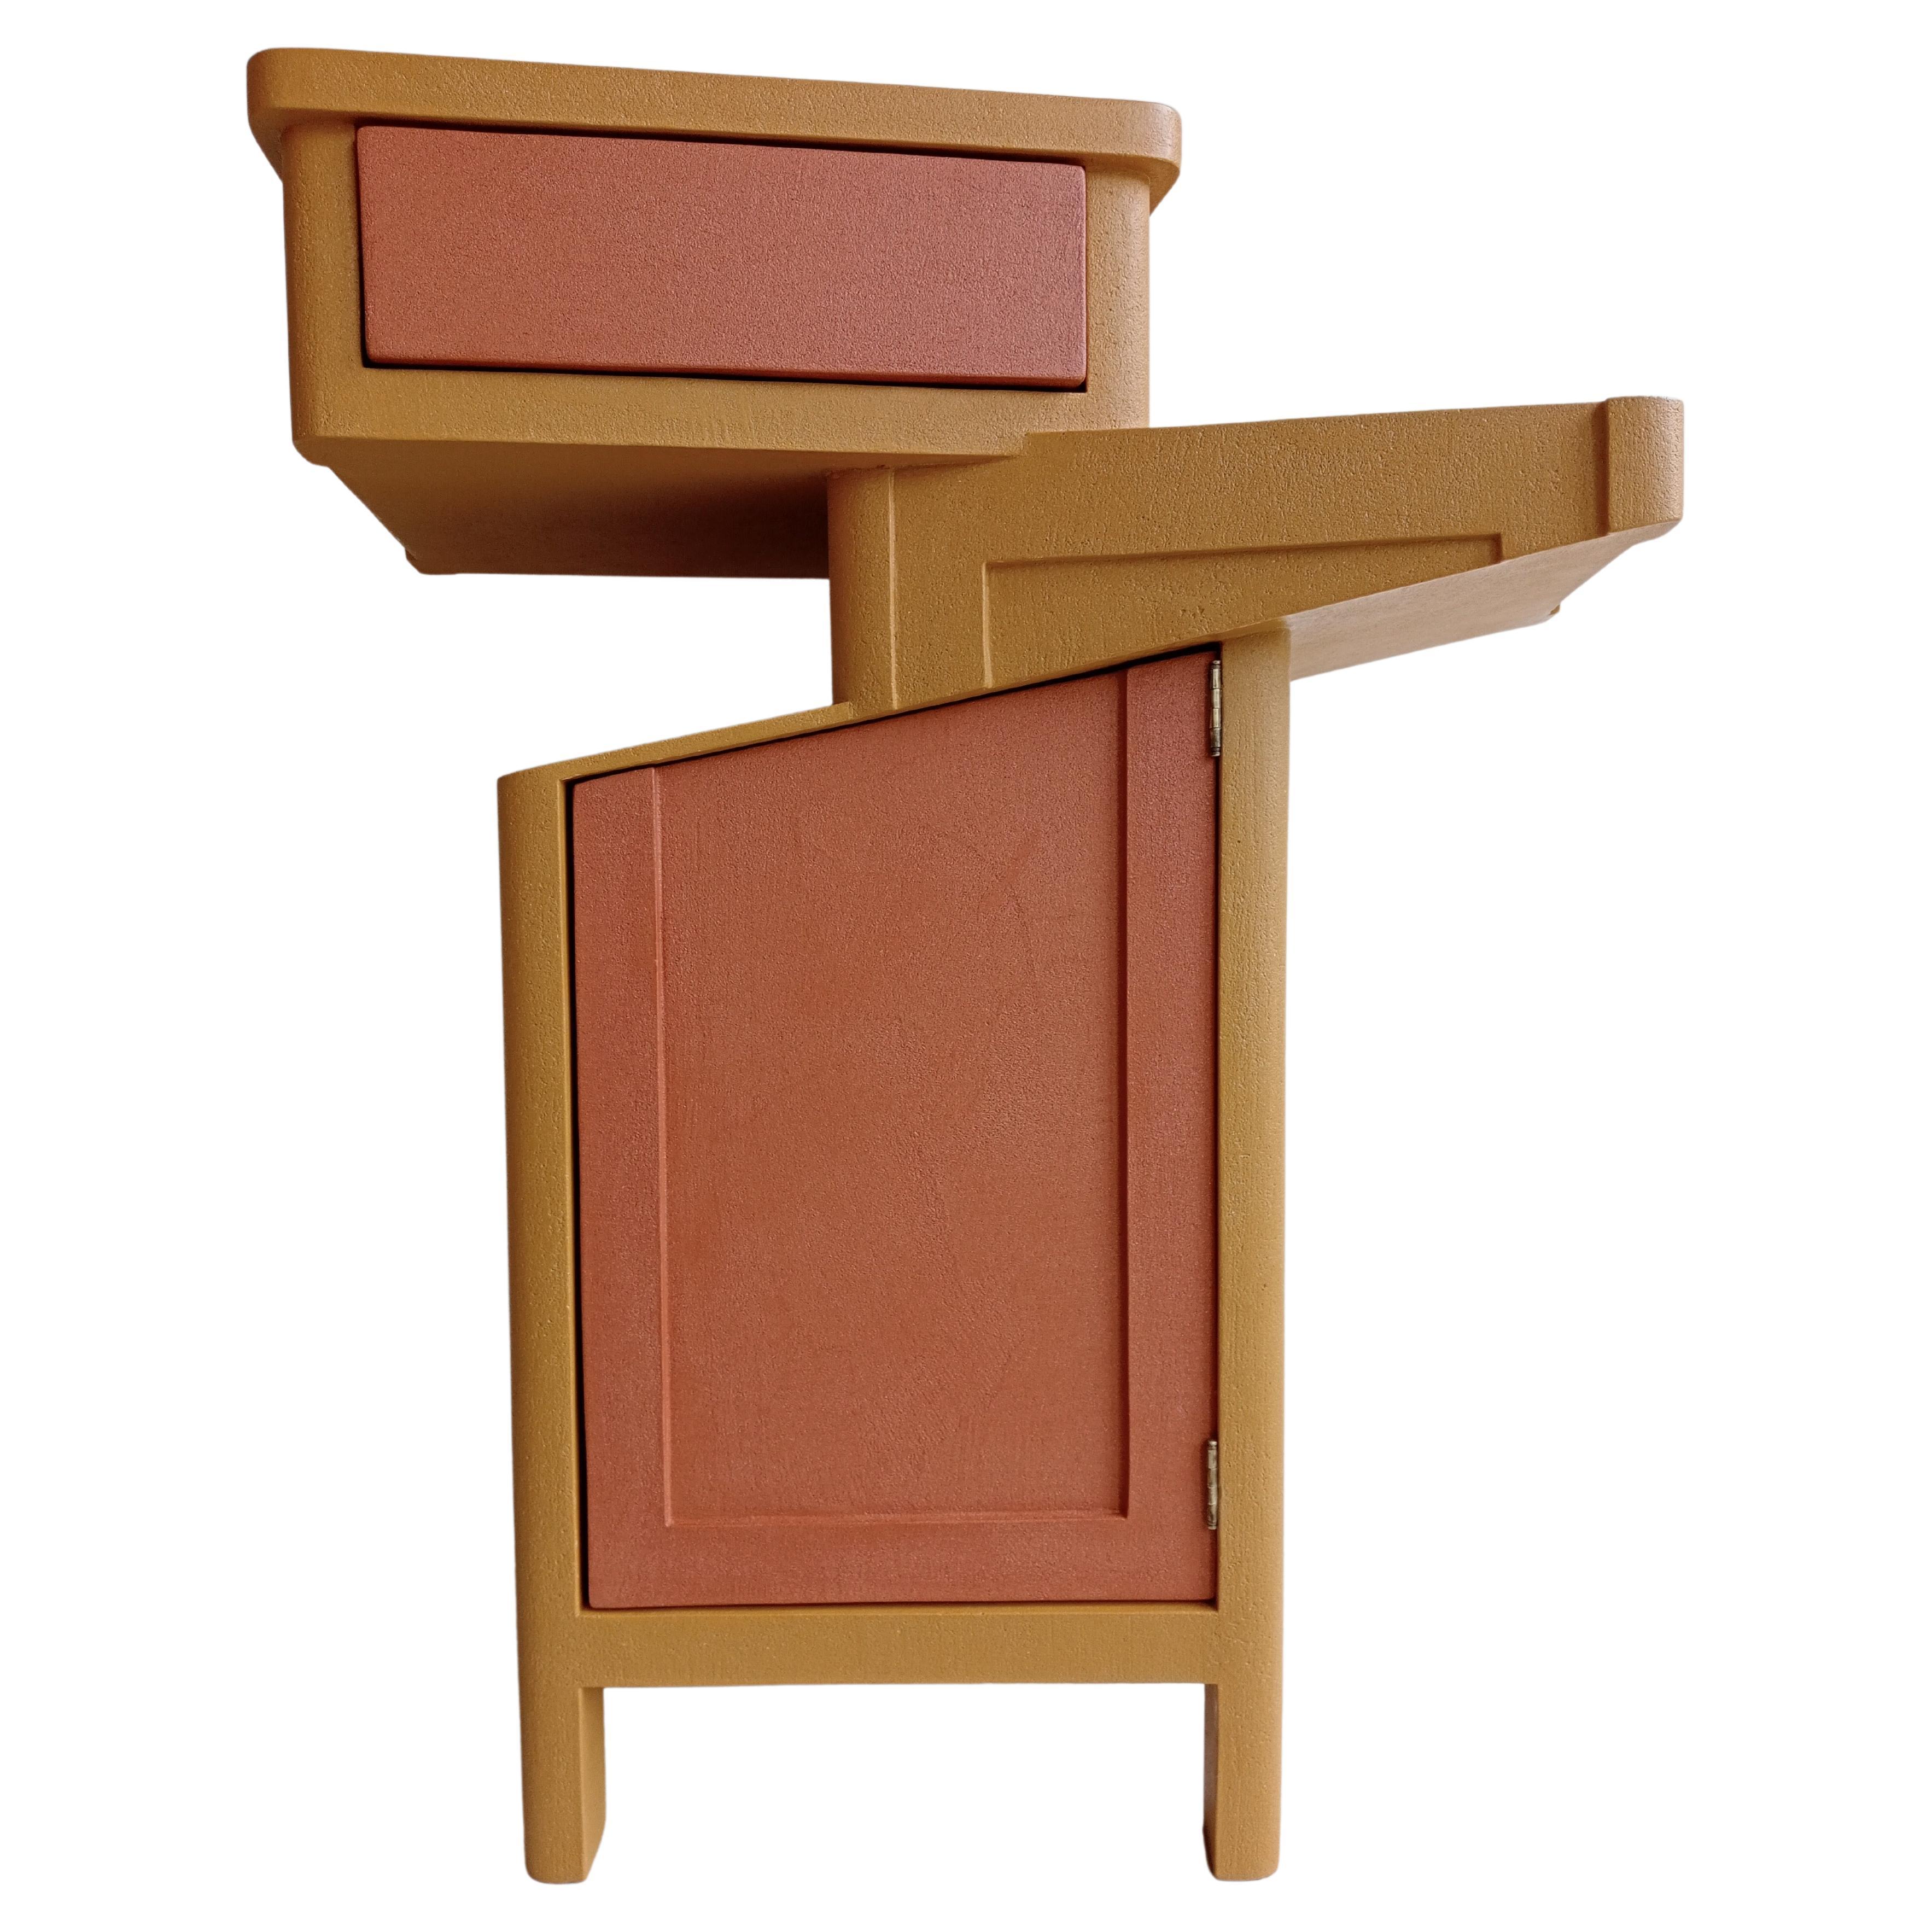 Cabinet Sculpture Italian Design Contemporary in Wood and Resin coloured